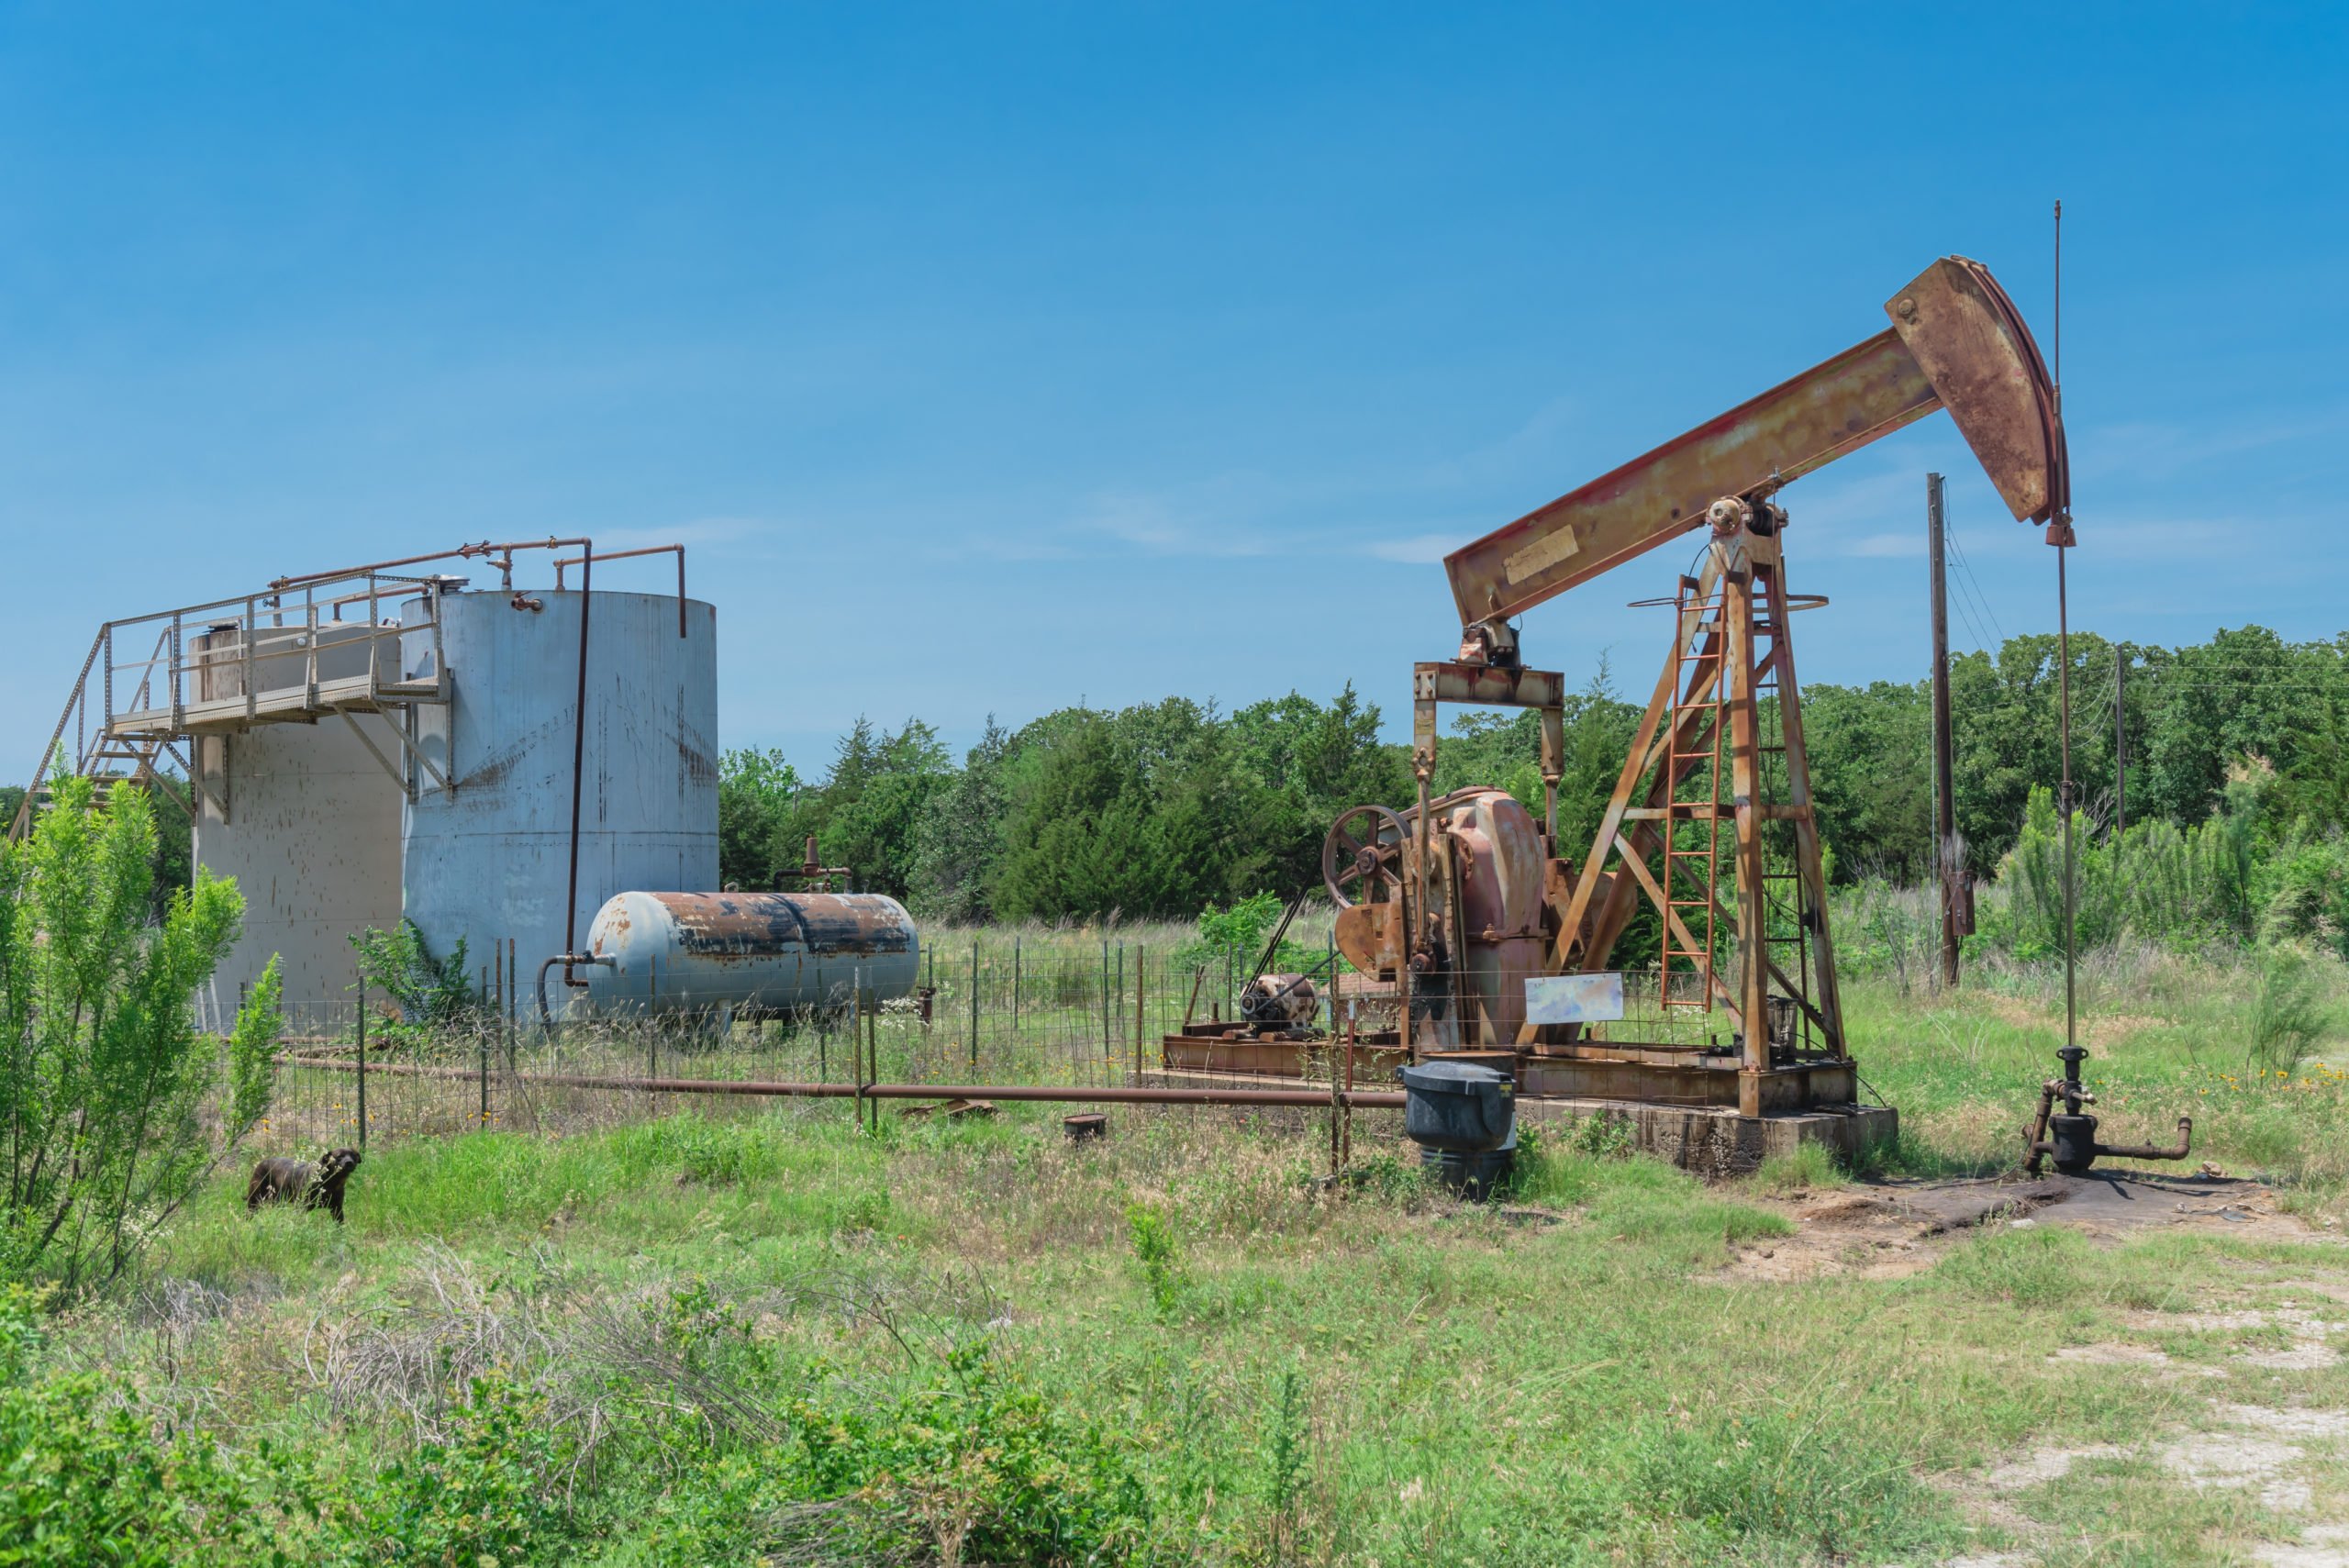 Rustic working pump jack pumping crude oil out of well to tank. Pumper and water emulsion at oil drilling site in Gainesville, Texas, US. Old pump jack, oil tanks for Energy and Industrial background